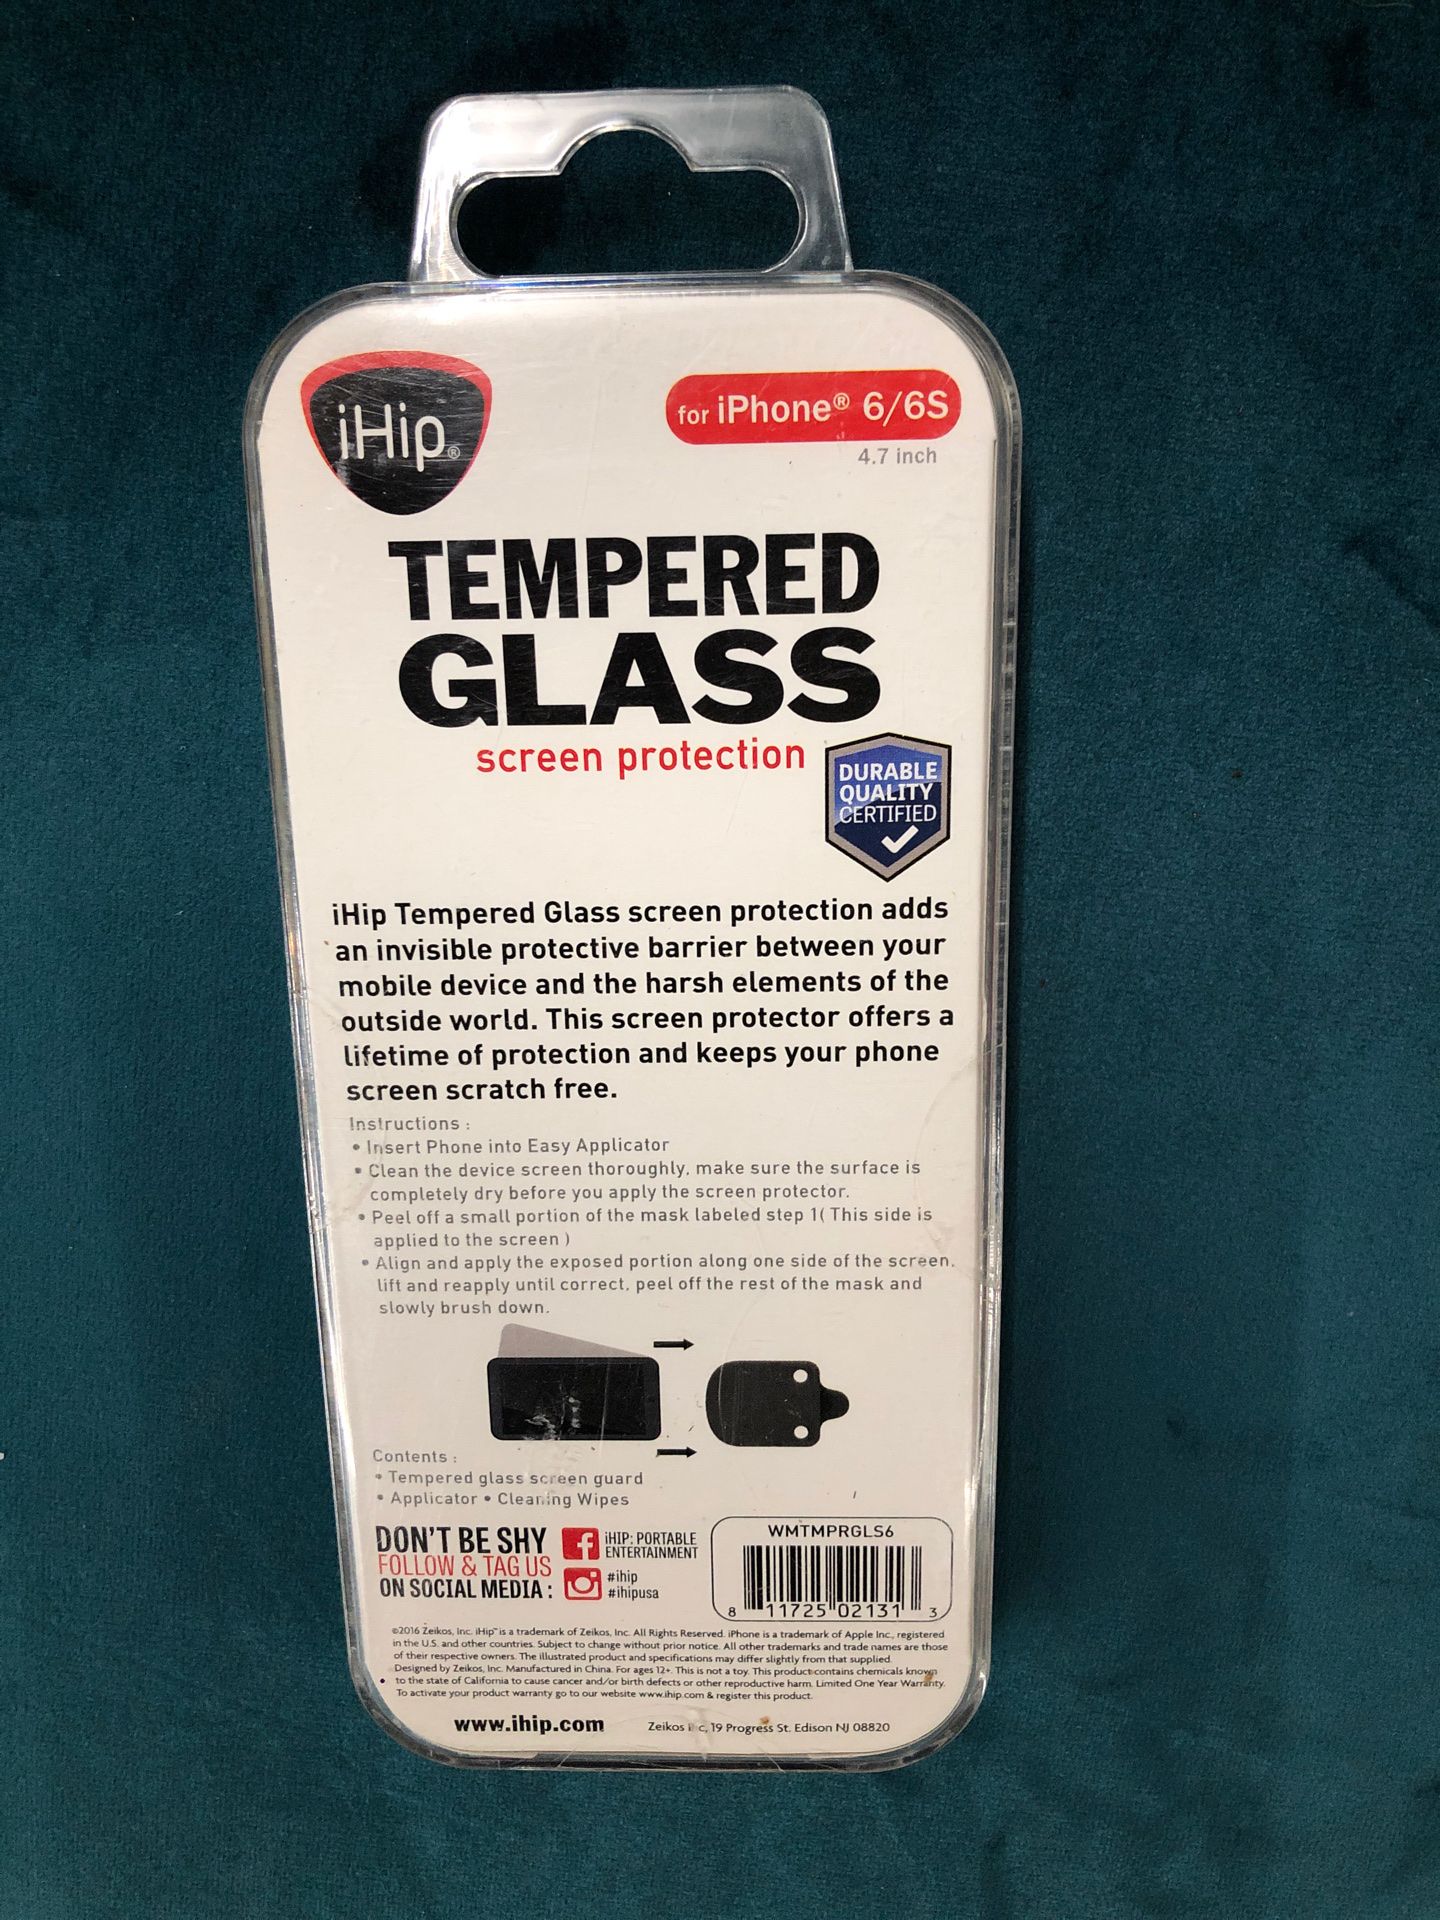 Tempered glass screen protector for iPhone 6/6S